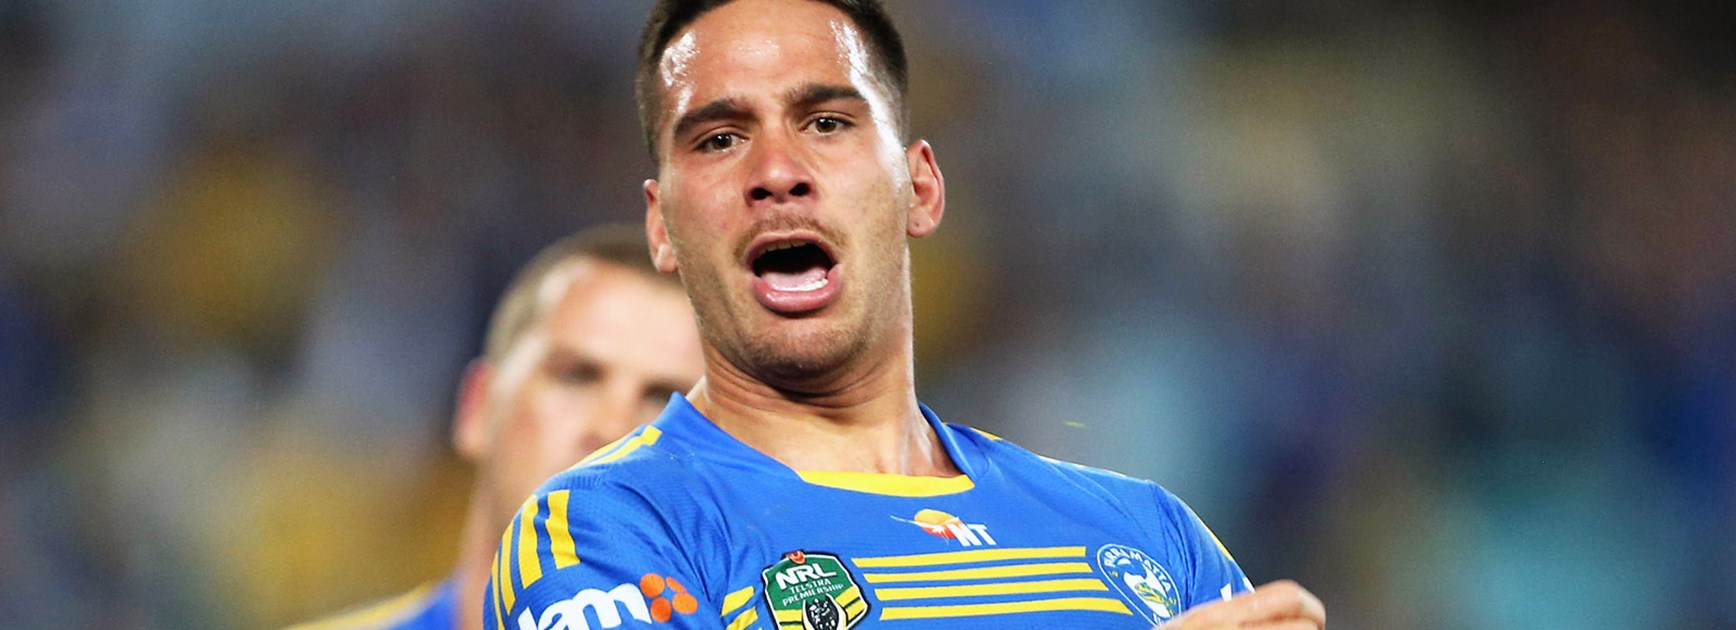 Eels playmaker Corey Norman scored a try against the Bulldogs in Round 9.